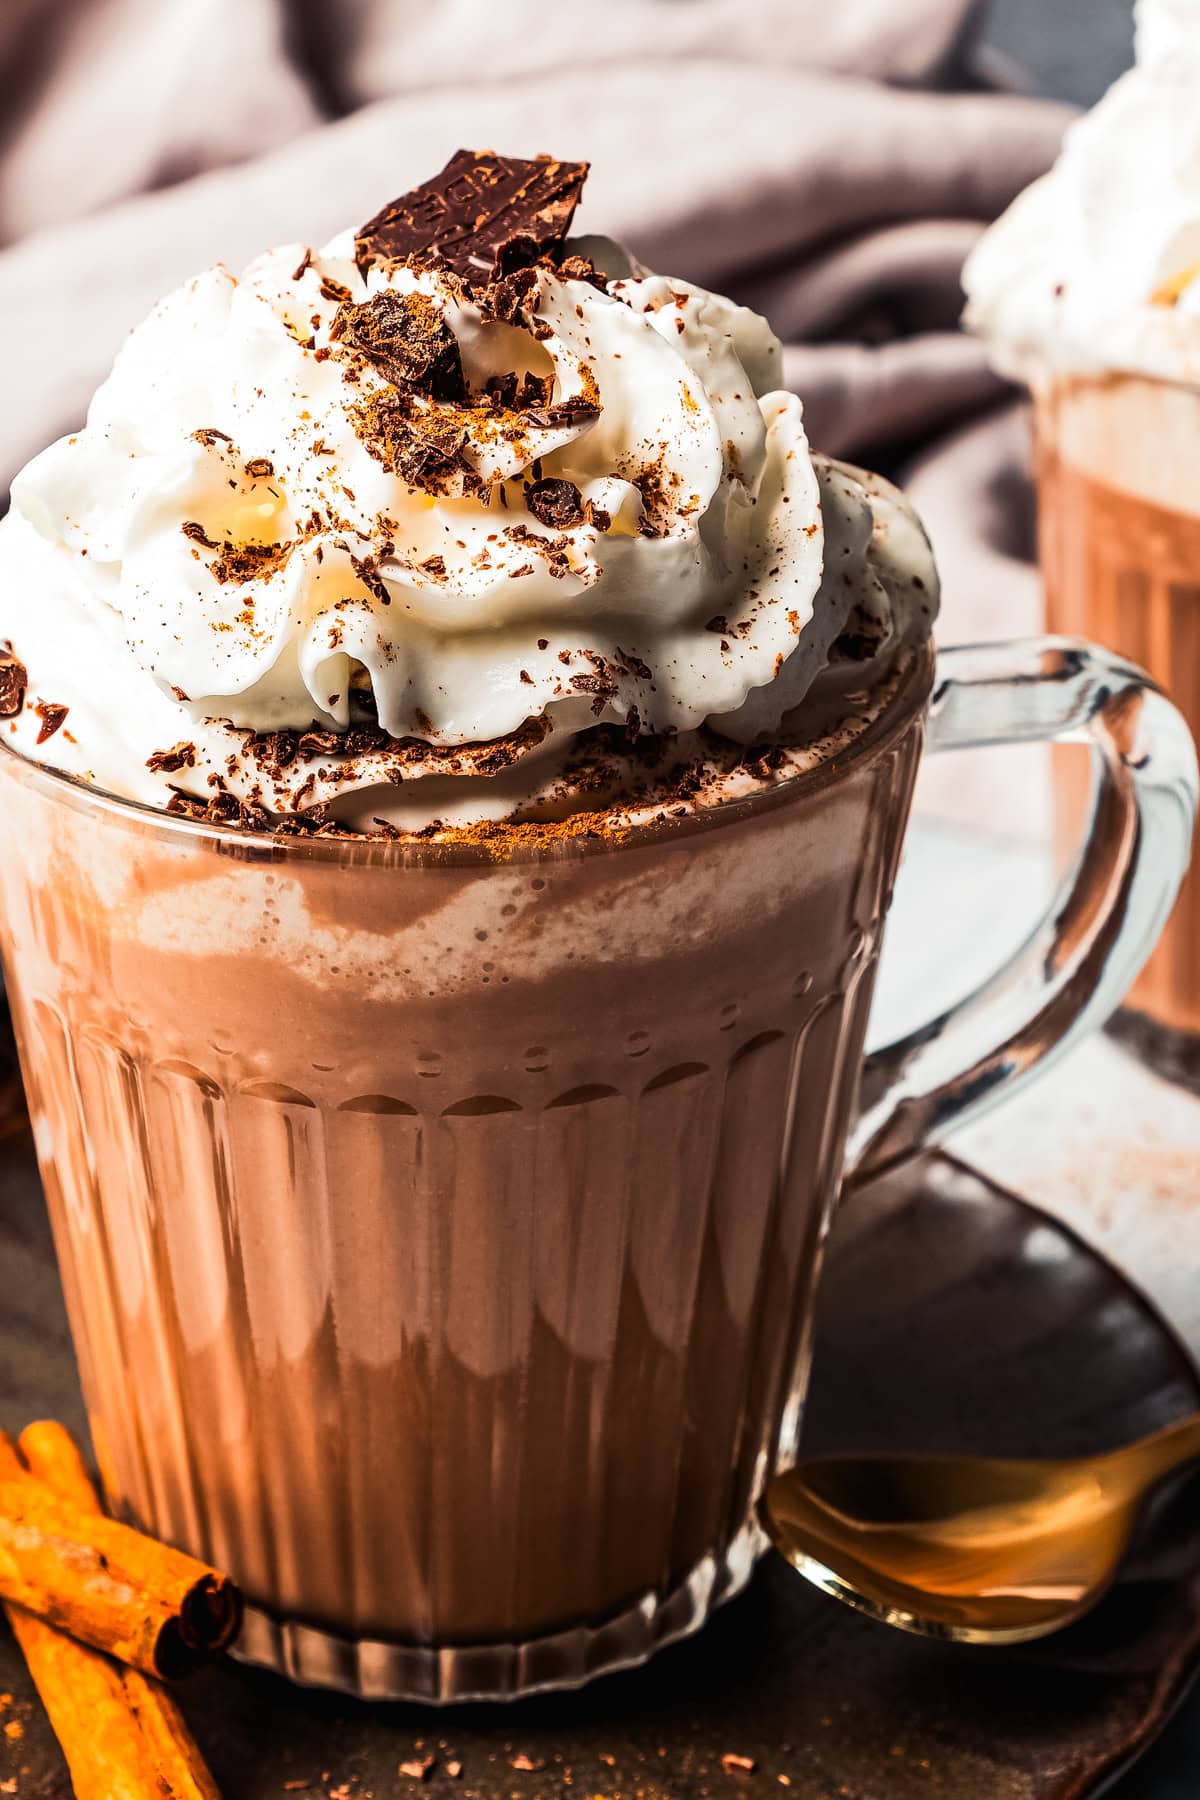 Up close photo of coffee served in a glass mug and topped with whipped cream and chocolate shavings.